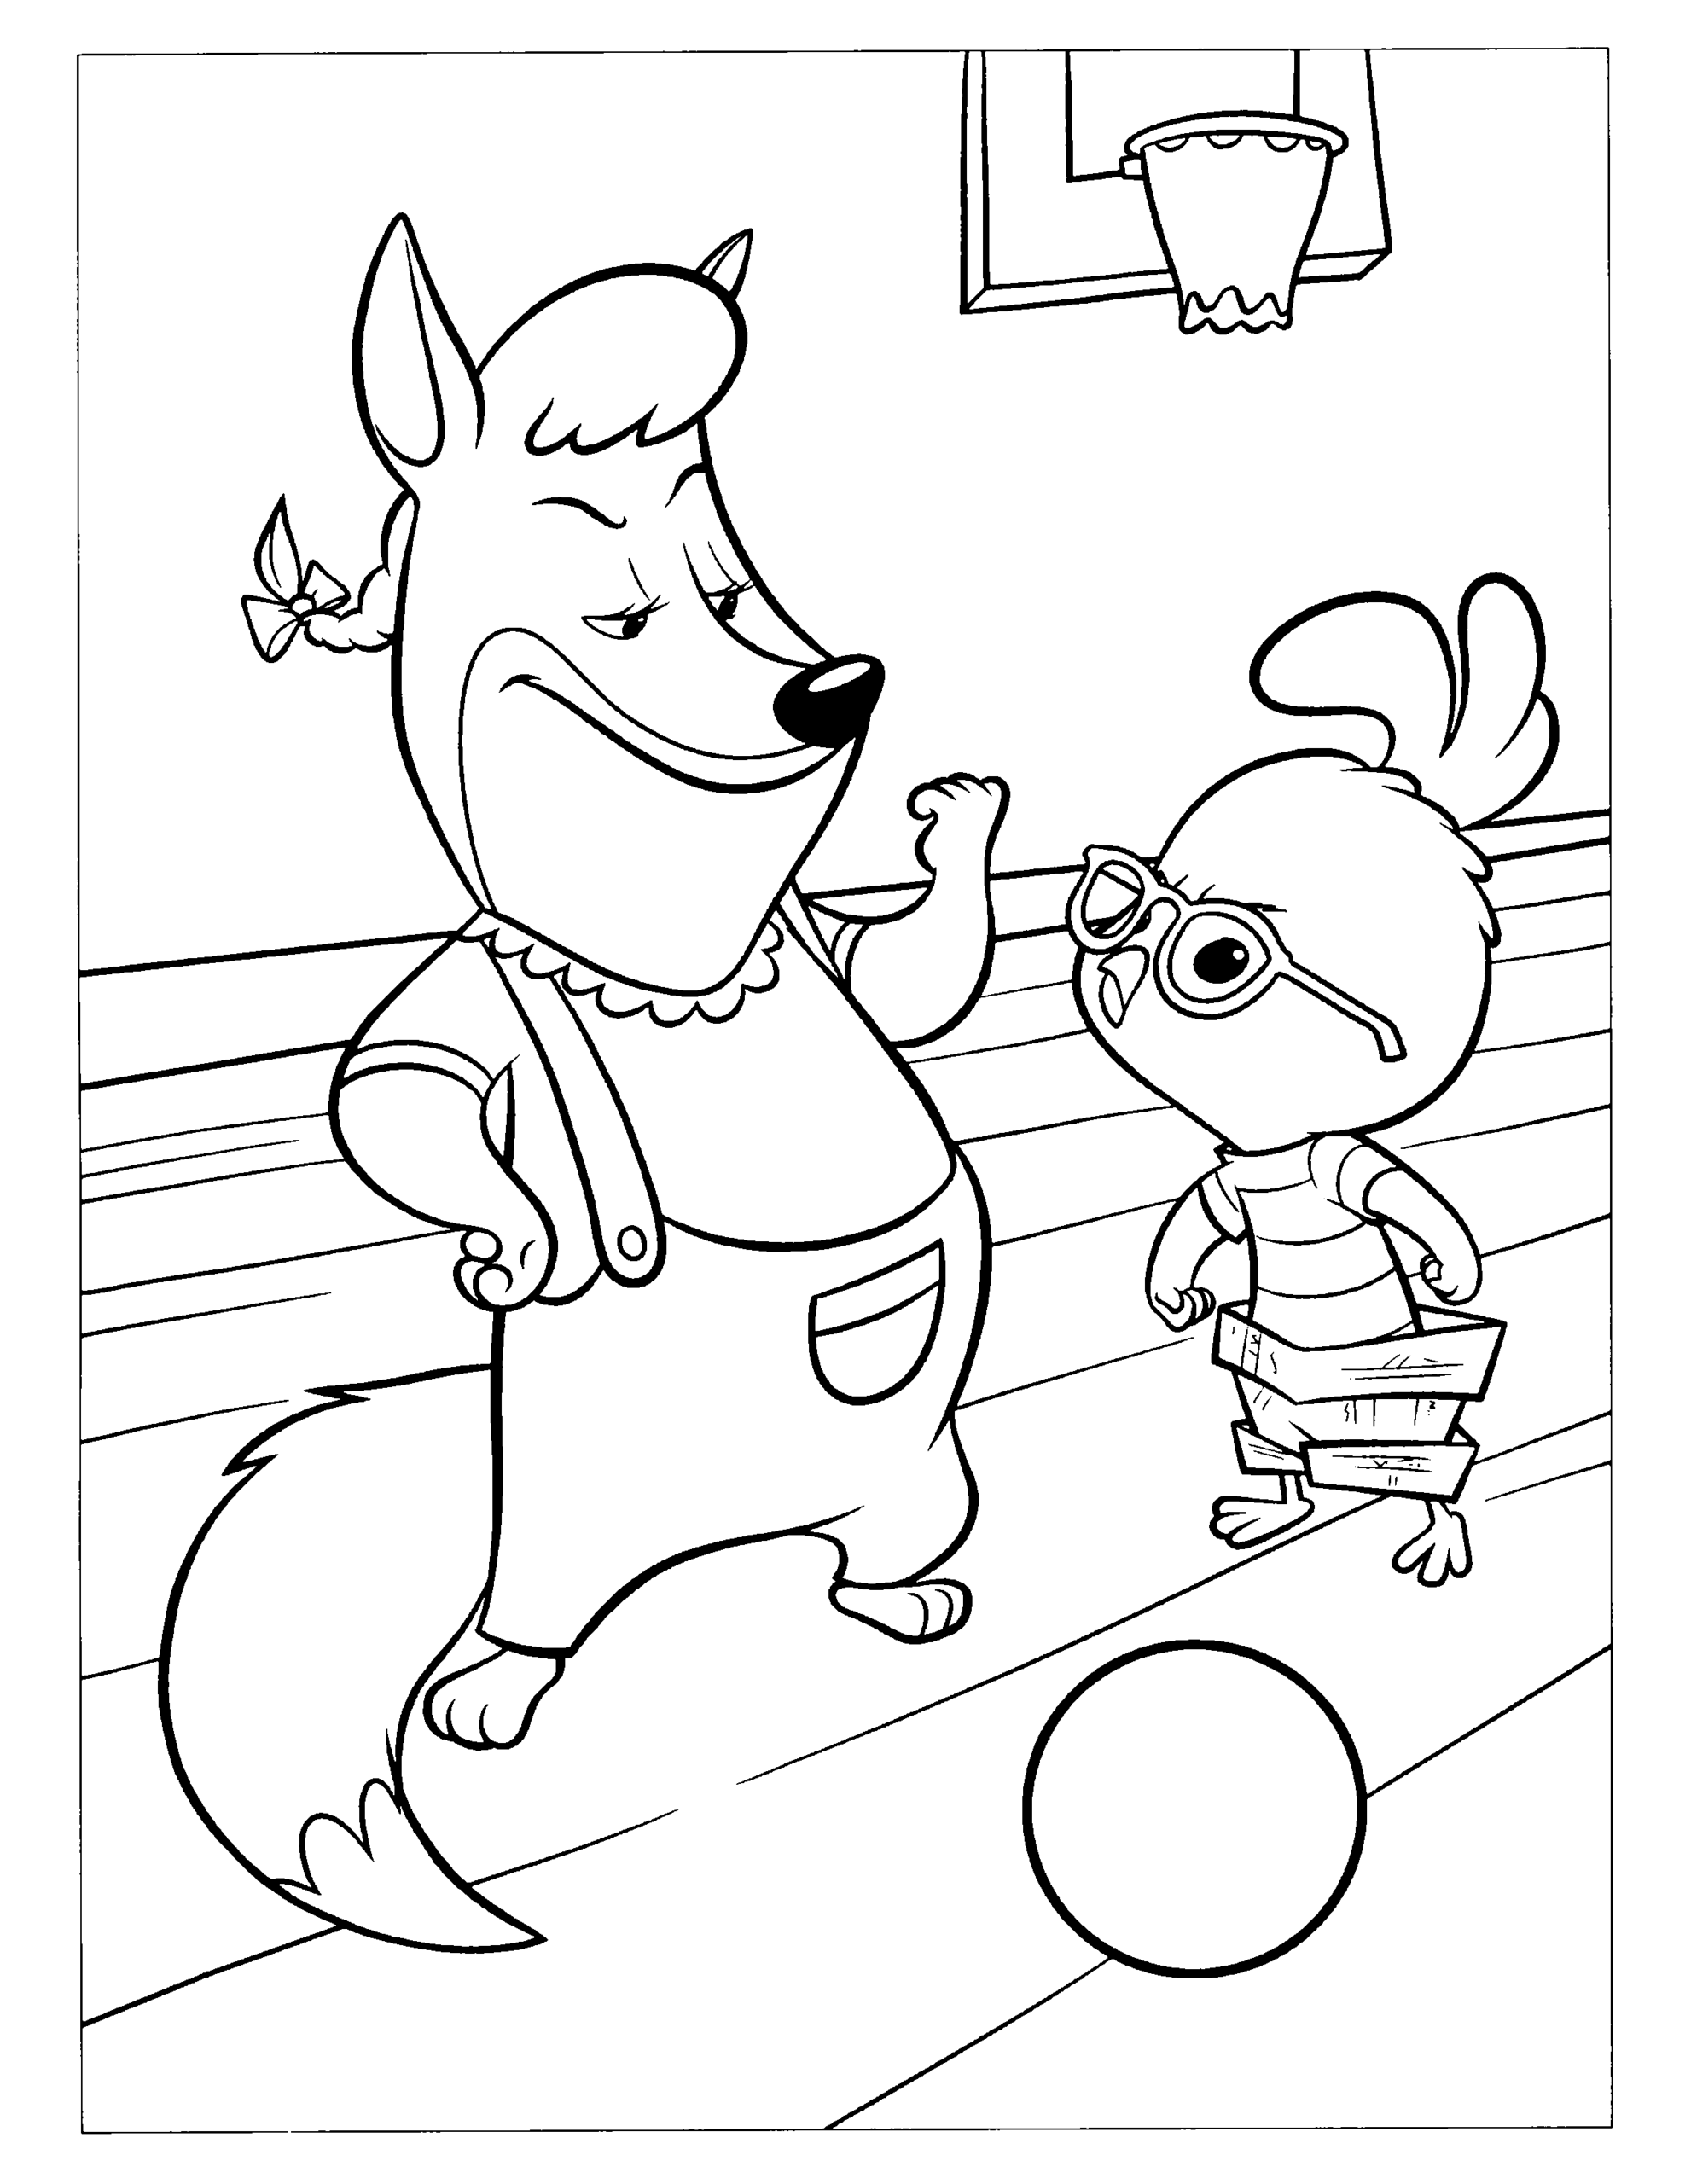 Chicken Little Coloring Pages TV Film chicken little 15 Printable 2020 02085 Coloring4free